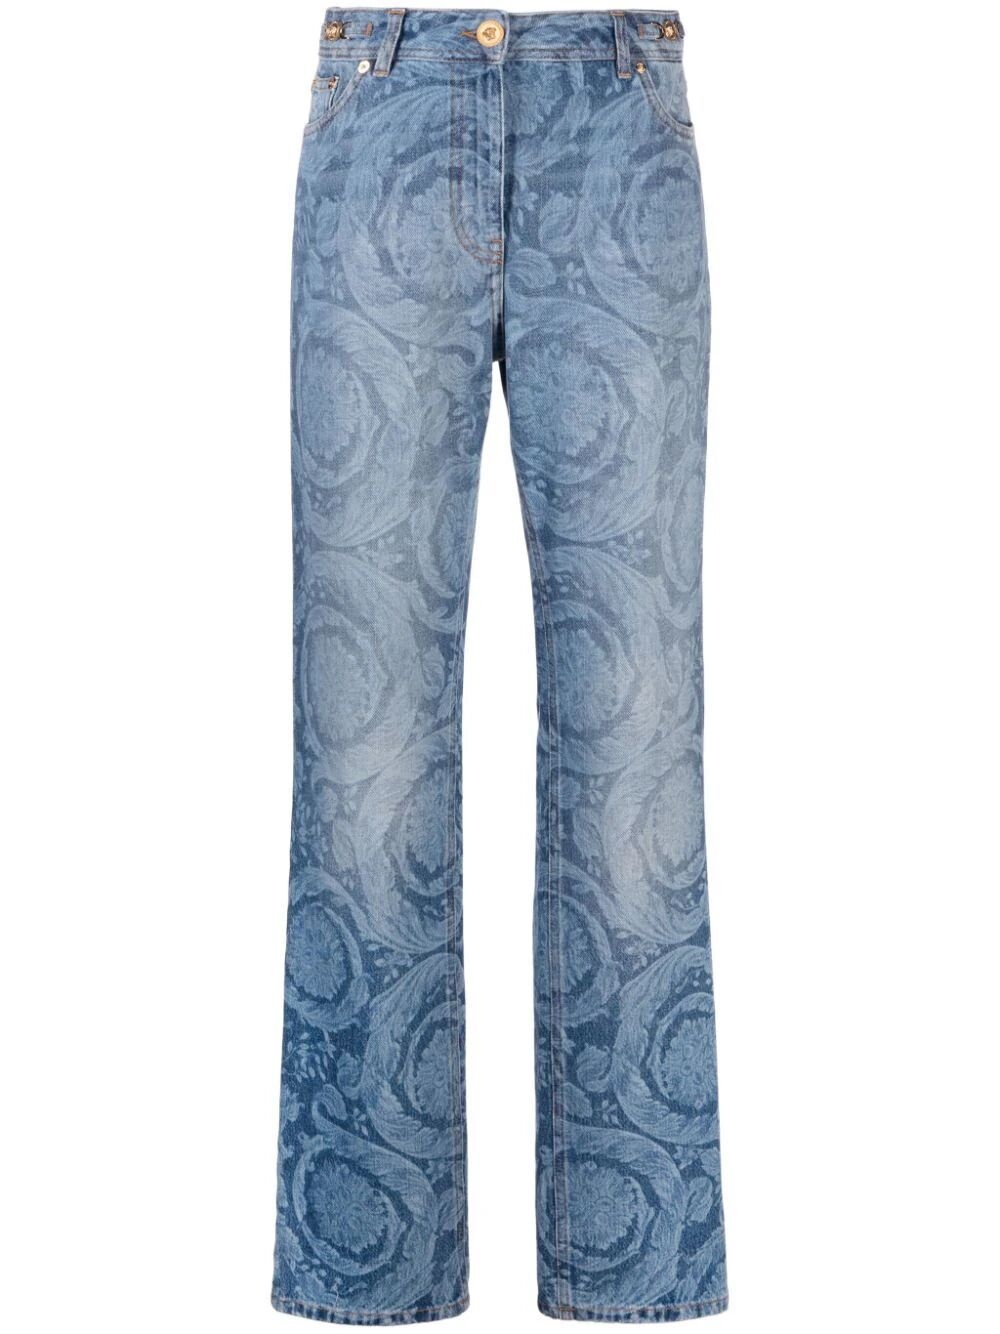 PANT DENIM LASER STONE WASH BAROQUE SERIES DENIM FABRIC WITH SPECIAL TREATMENT - 4